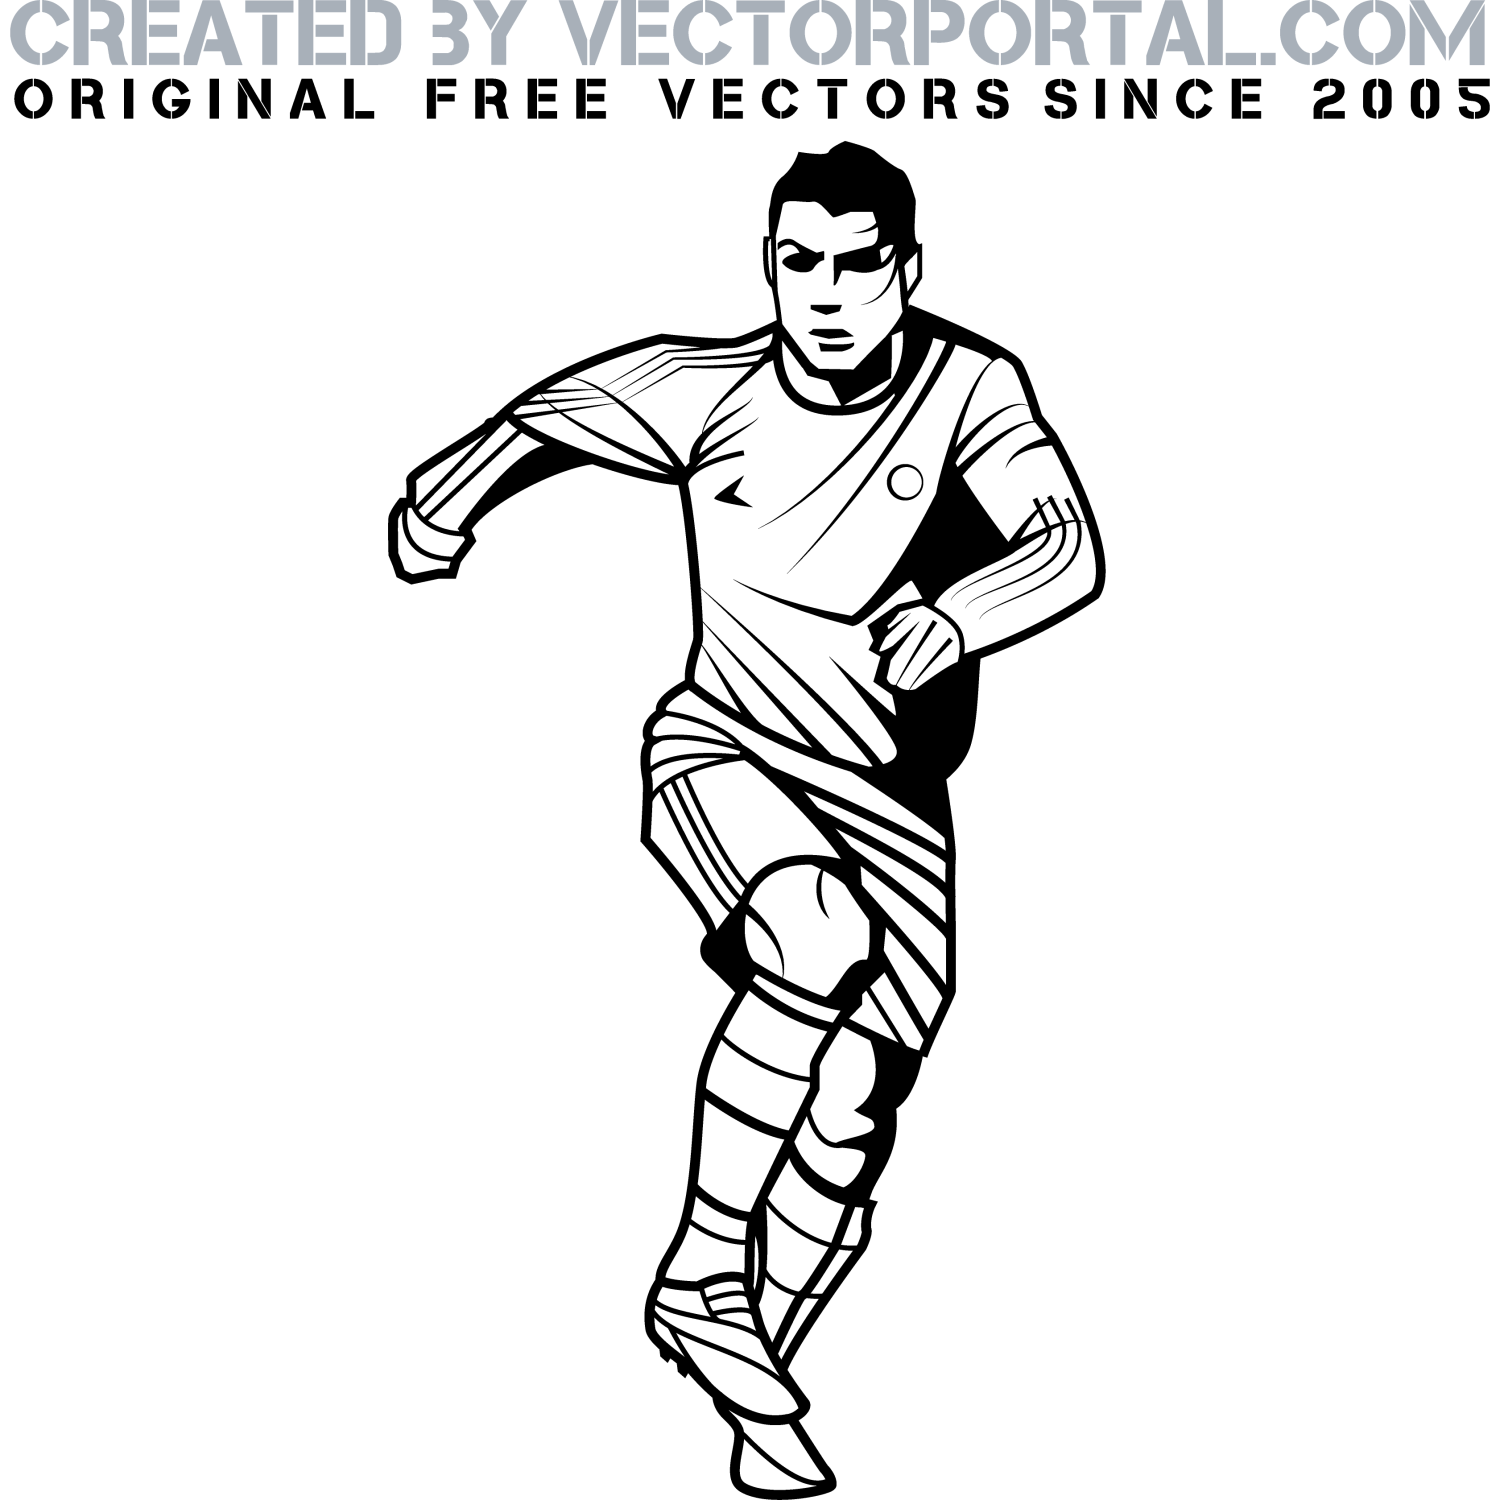 Vector for free use: Soccer player vector clip art